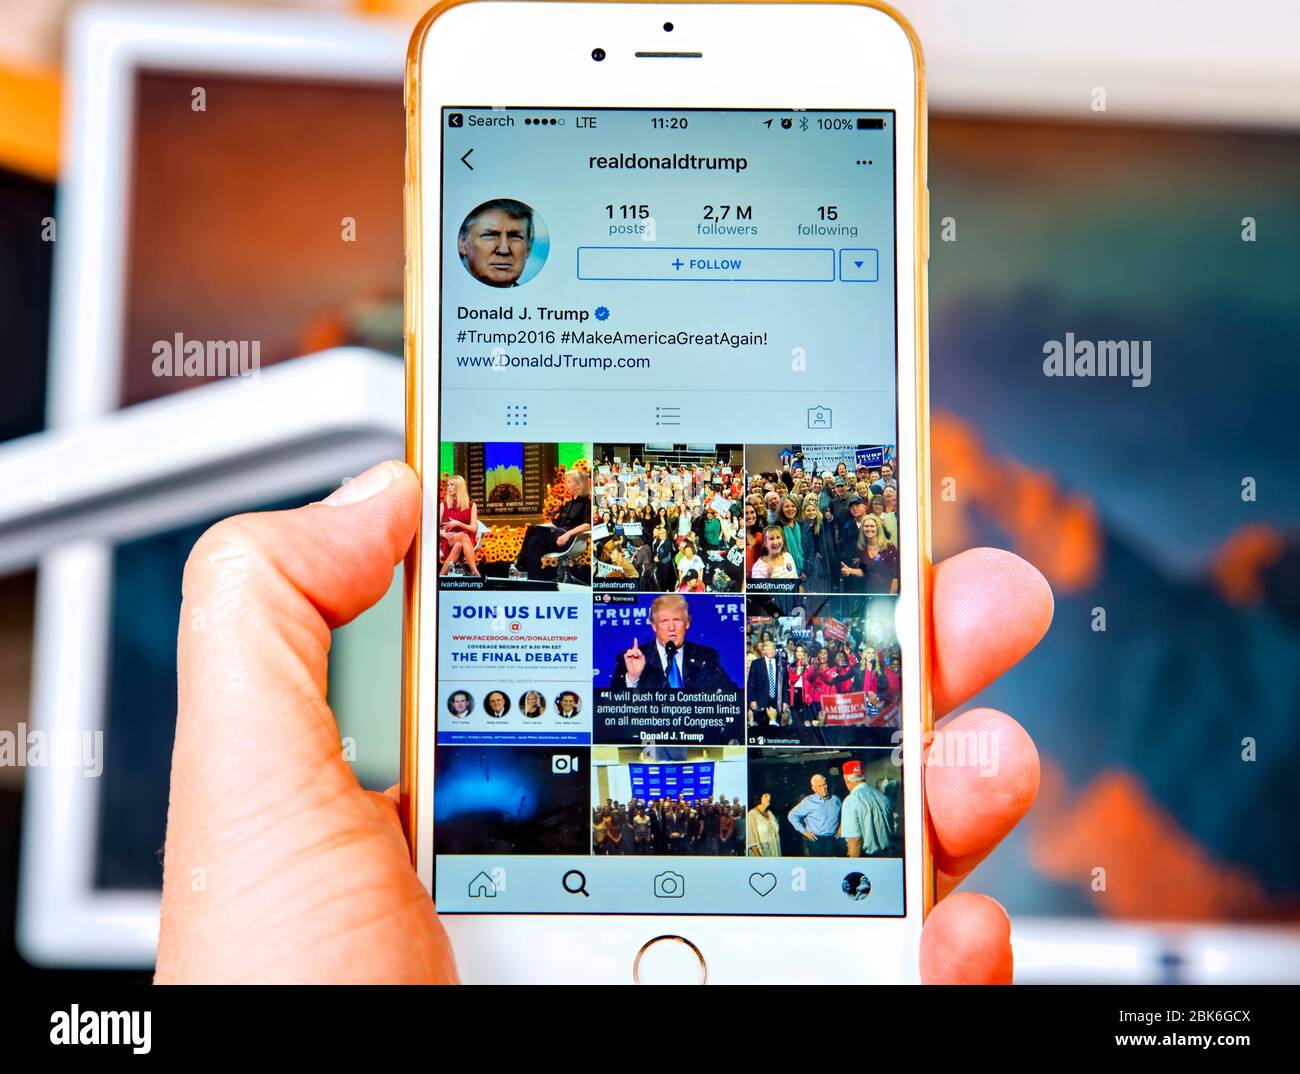 WROCLAW. POLAND- 20, October, 2016: Donald Trump's Instagram account shown on Iphone 6 plus, Stock Photo